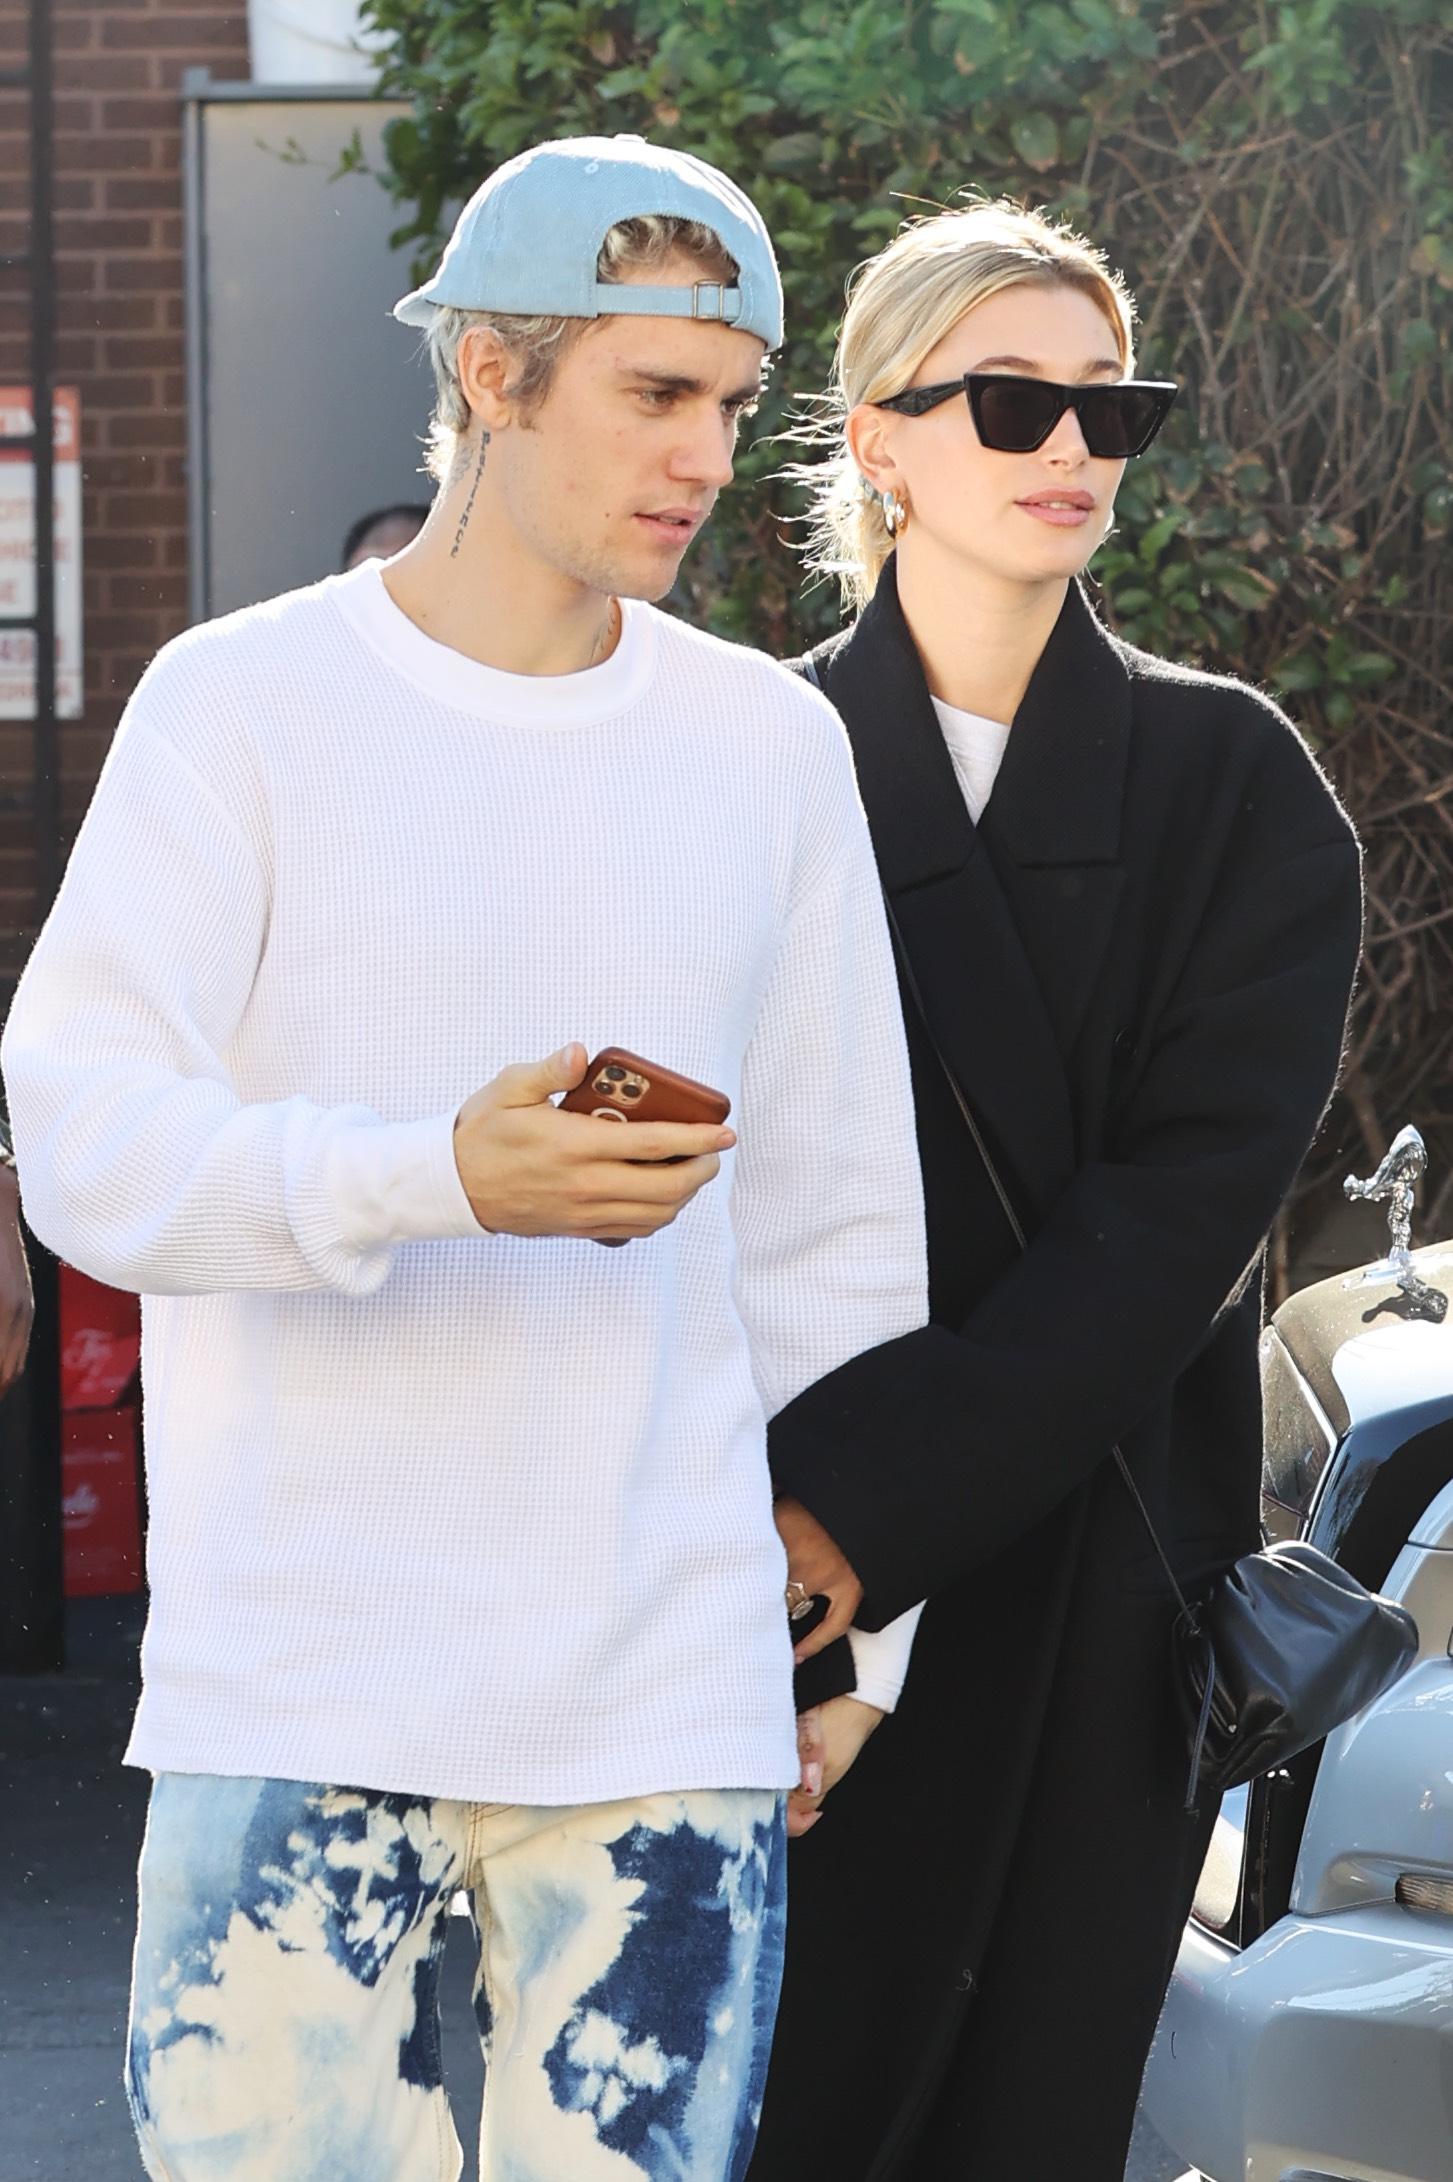 Justin and Hailey Bieber enjoy lunch at Il Pastaio. Justin showcases his new face with no mustache. 16 Feb 2020 Pictured: justin Bieber, Hailey Baldwin. Photo credit: Rachpoot/MEGA TheMegaAgency.com +1 888 505 6342 (Mega Agency TagID: MEGA611322_006.jpg) [Photo via Mega Agency]